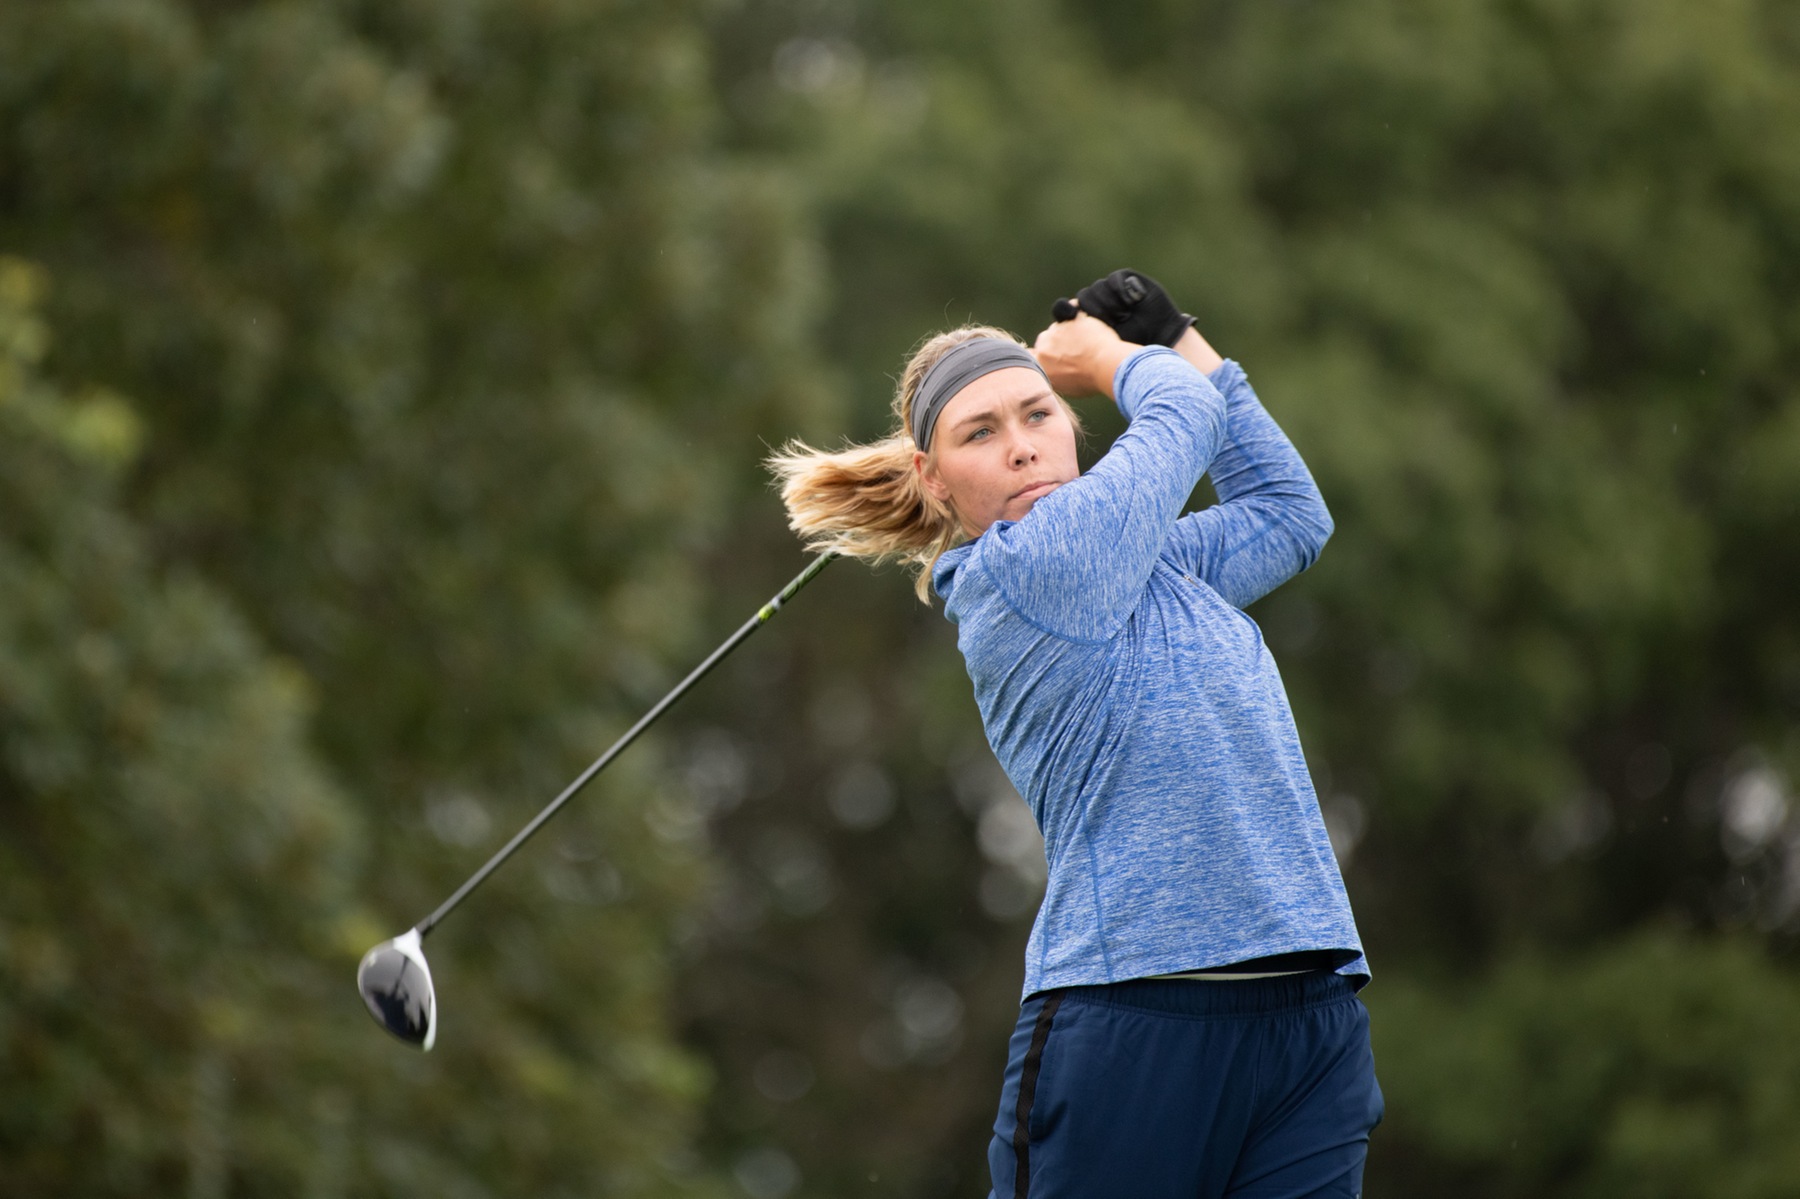 Women's Golf finishes 2nd at Stout Invite, Glaeser third overall